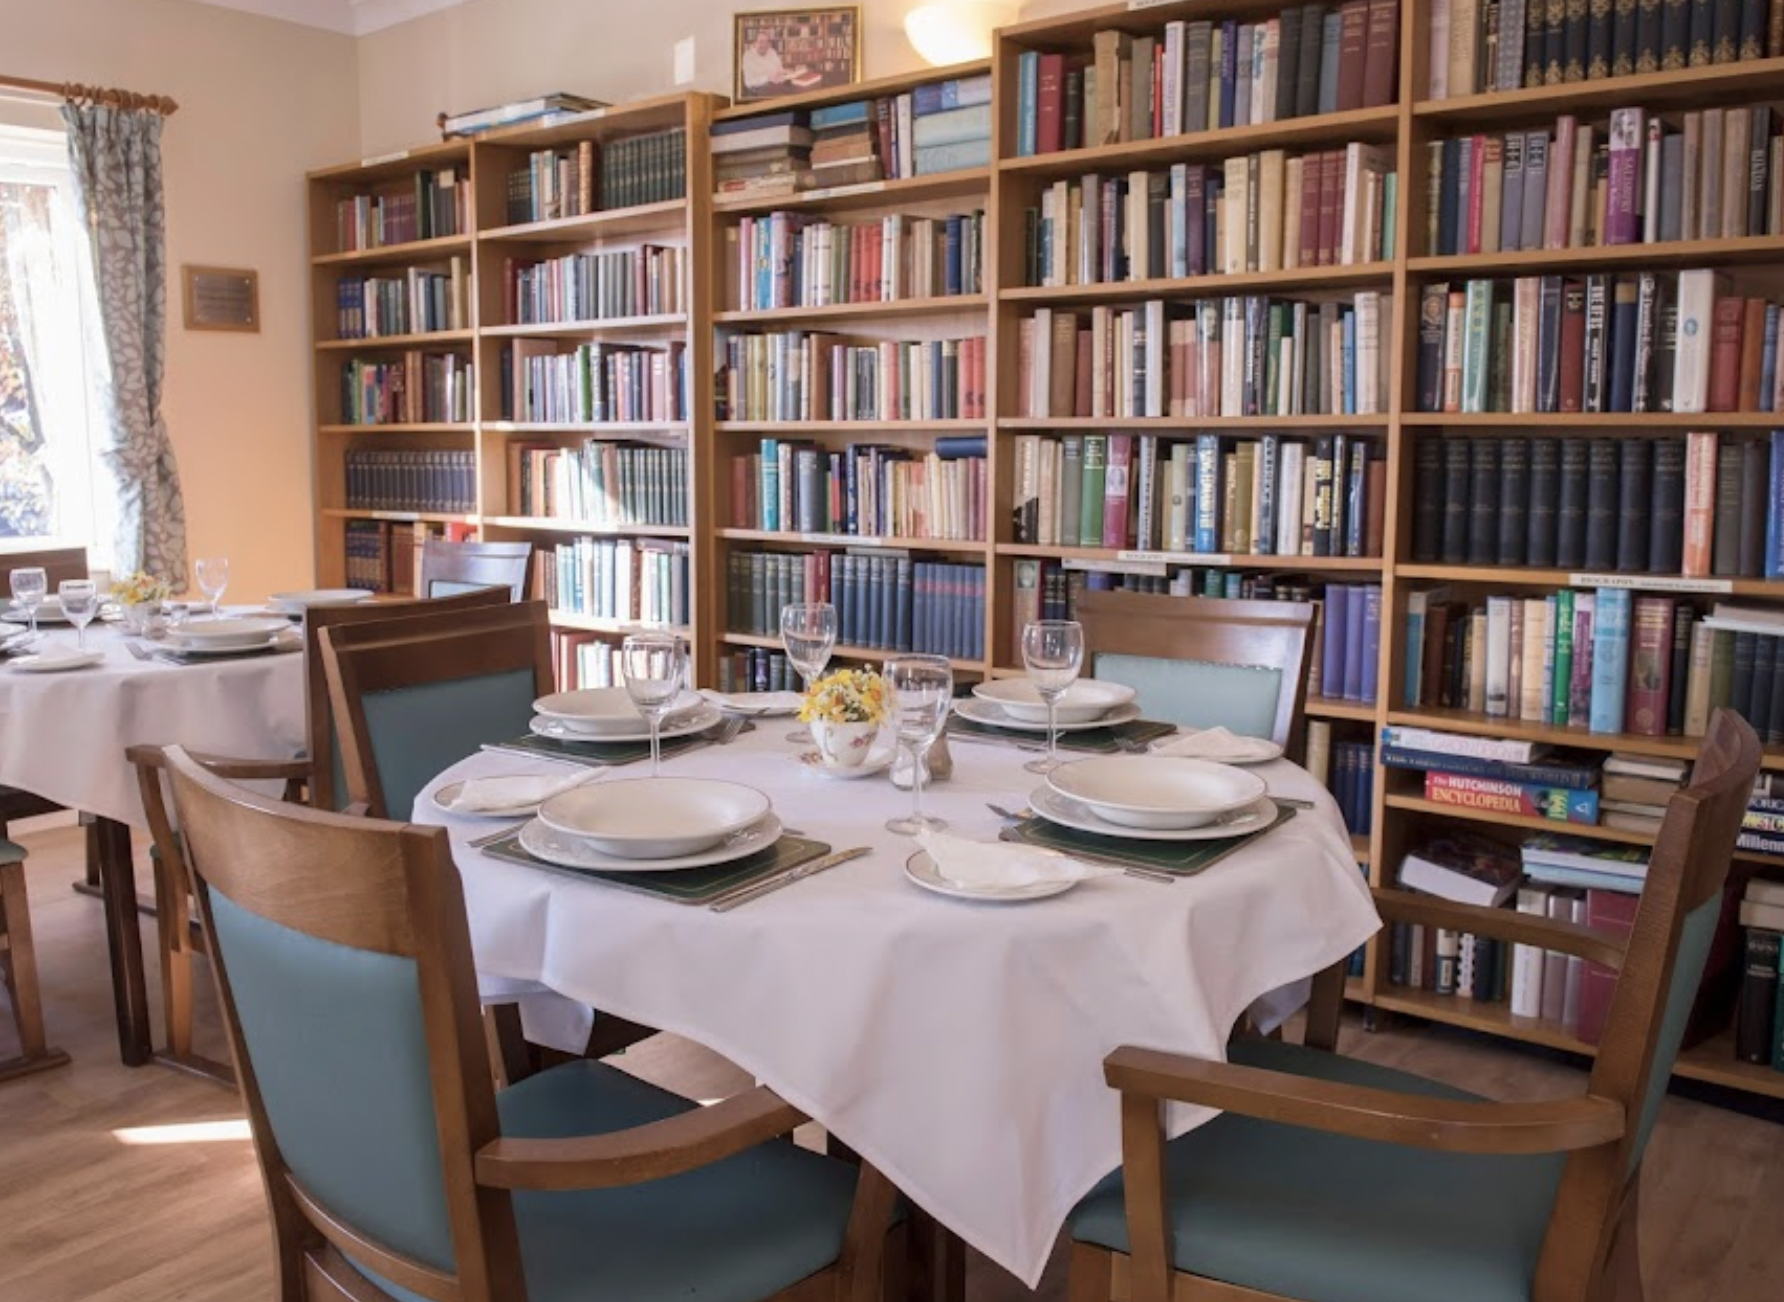 Dining Room at Elm View Care Home in Clevedon, Somerset